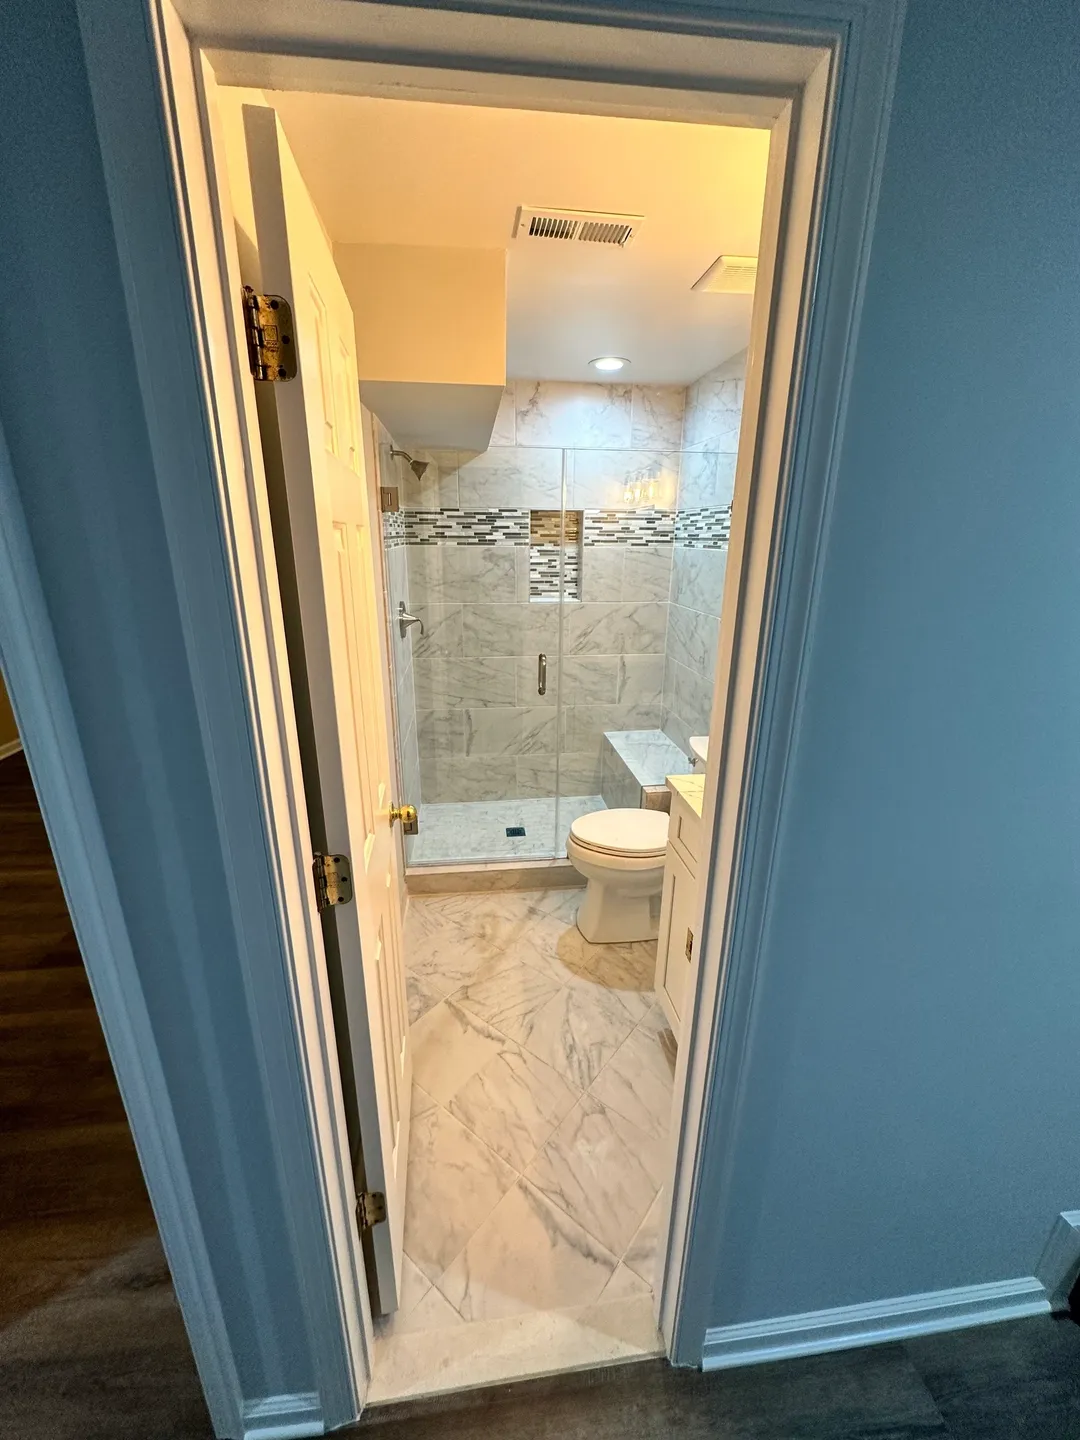 A bathroom with a toilet and shower in it